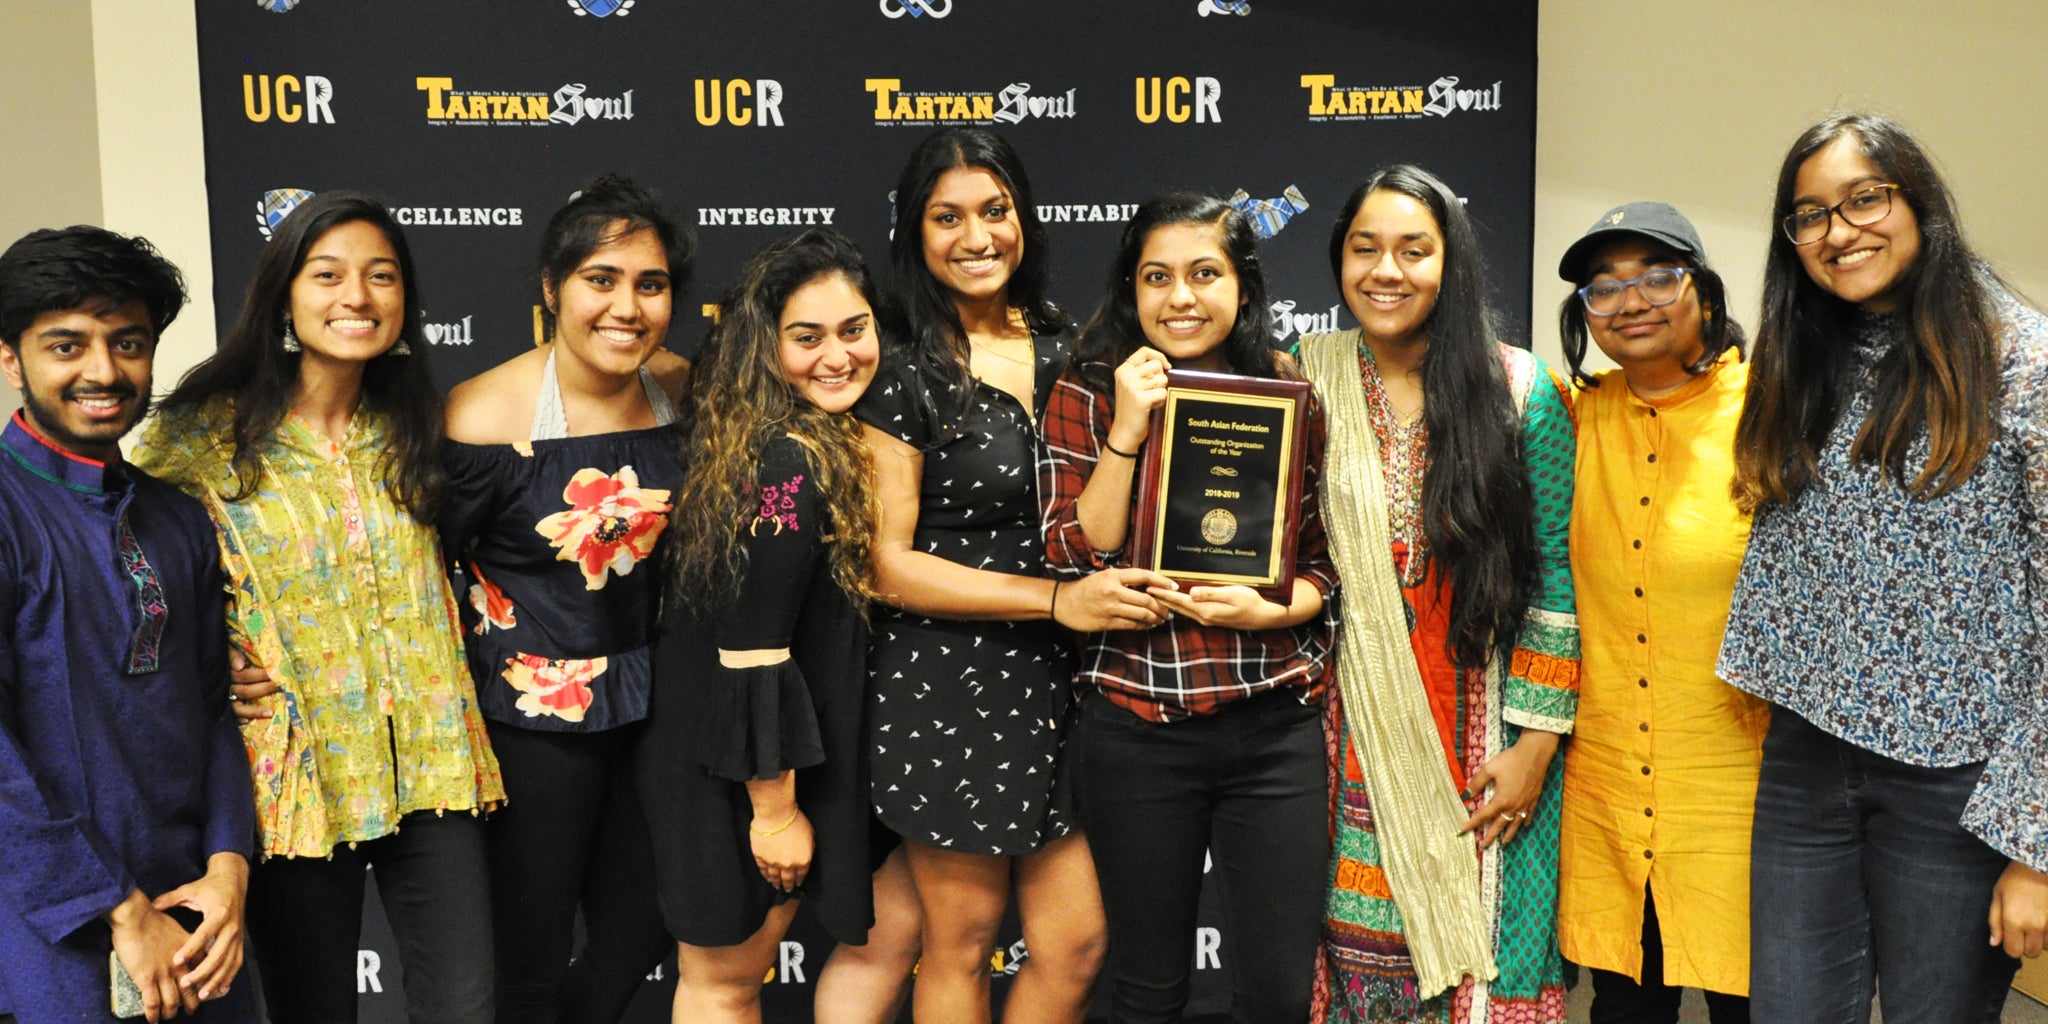 Members of a student organization pose with a service award.